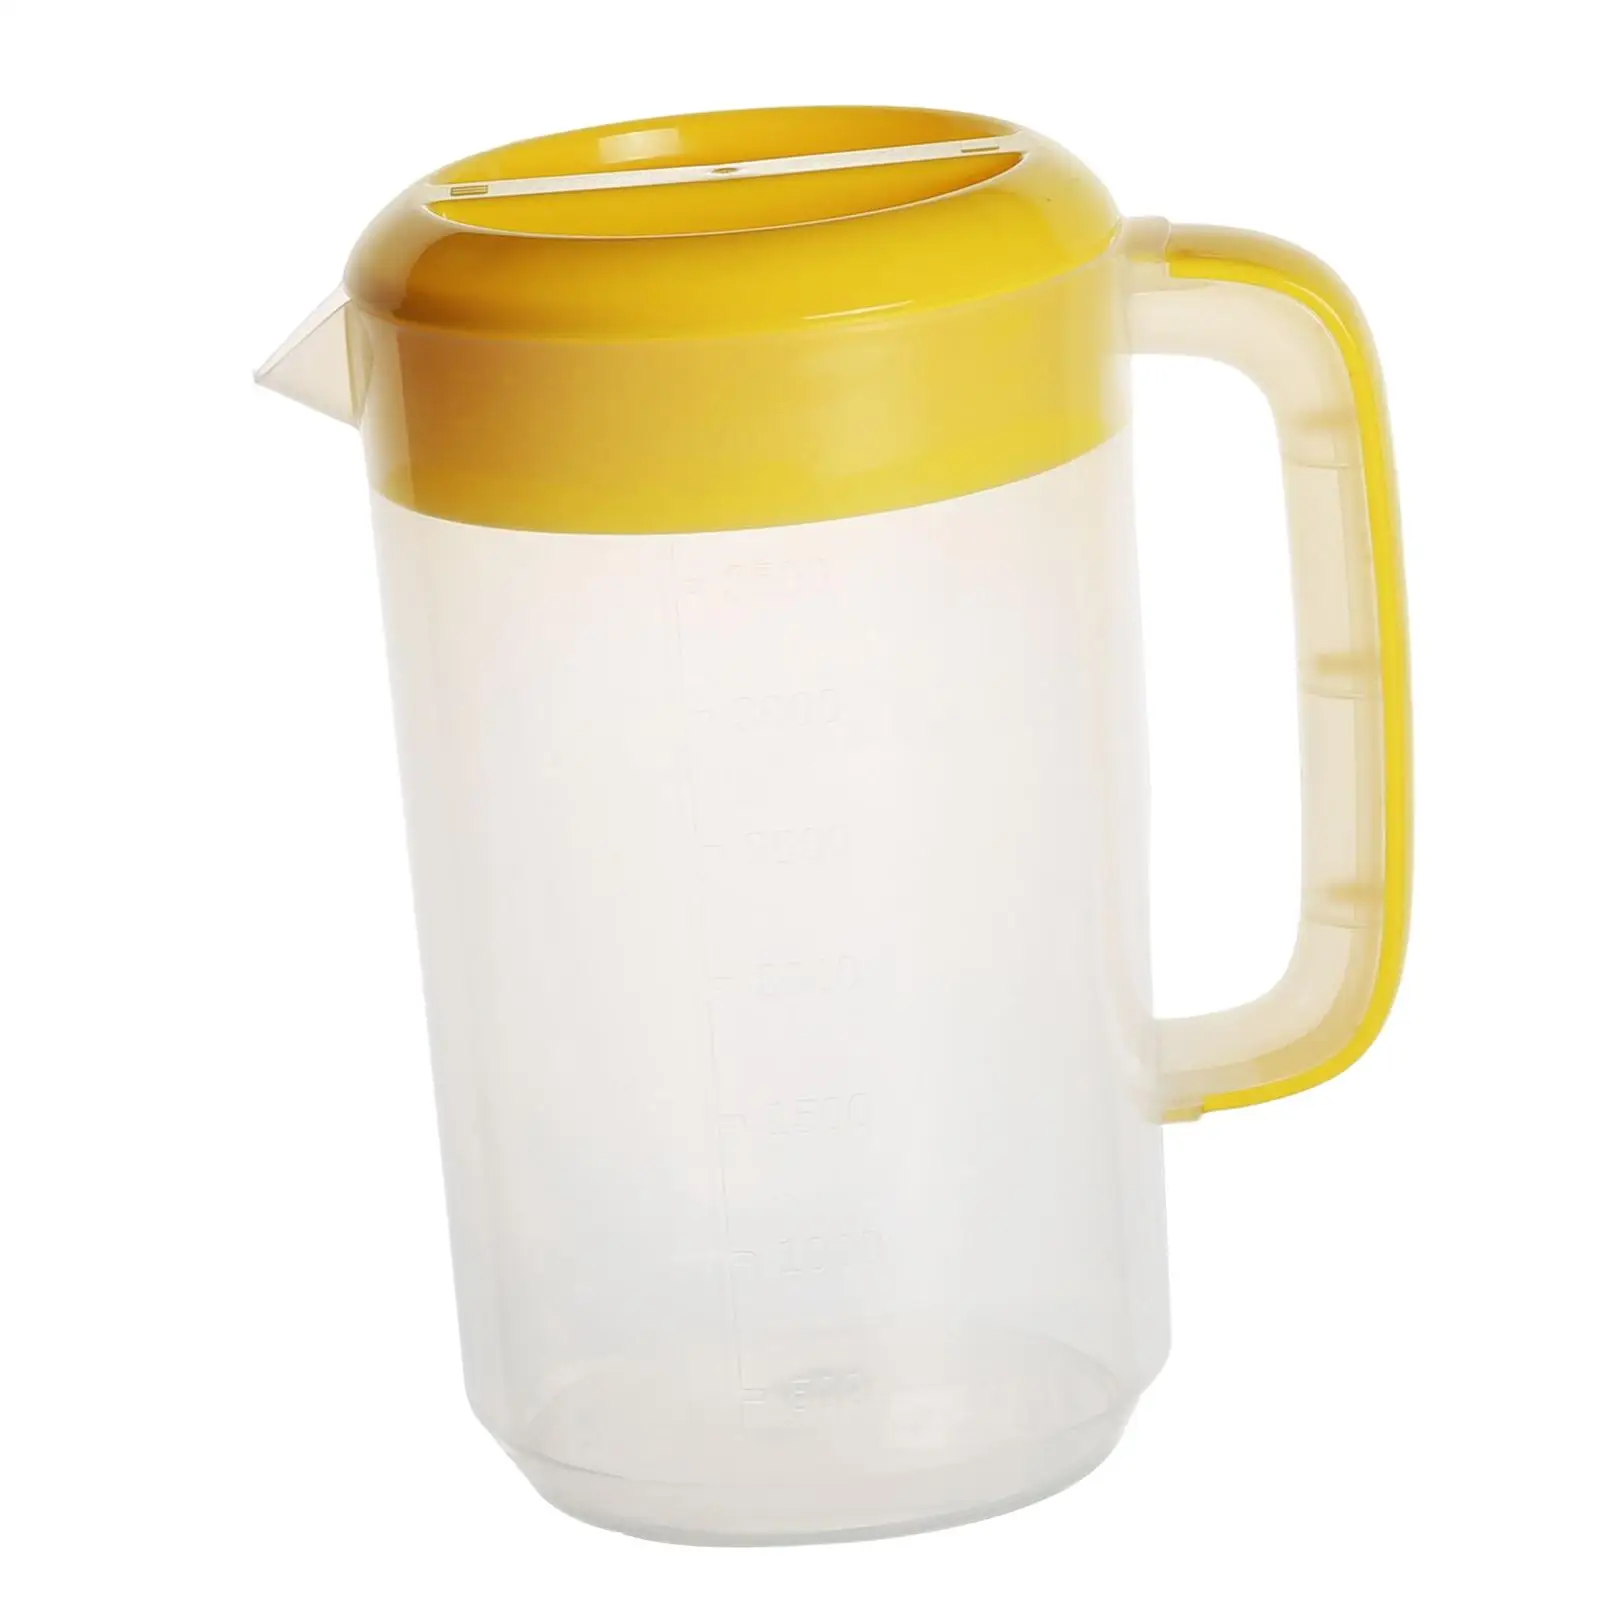  Pitcher with Lid 2.5L Durability High Capacity leak Containers Jug cold Hot Beverages Picnic Milk Restaurant Bedside